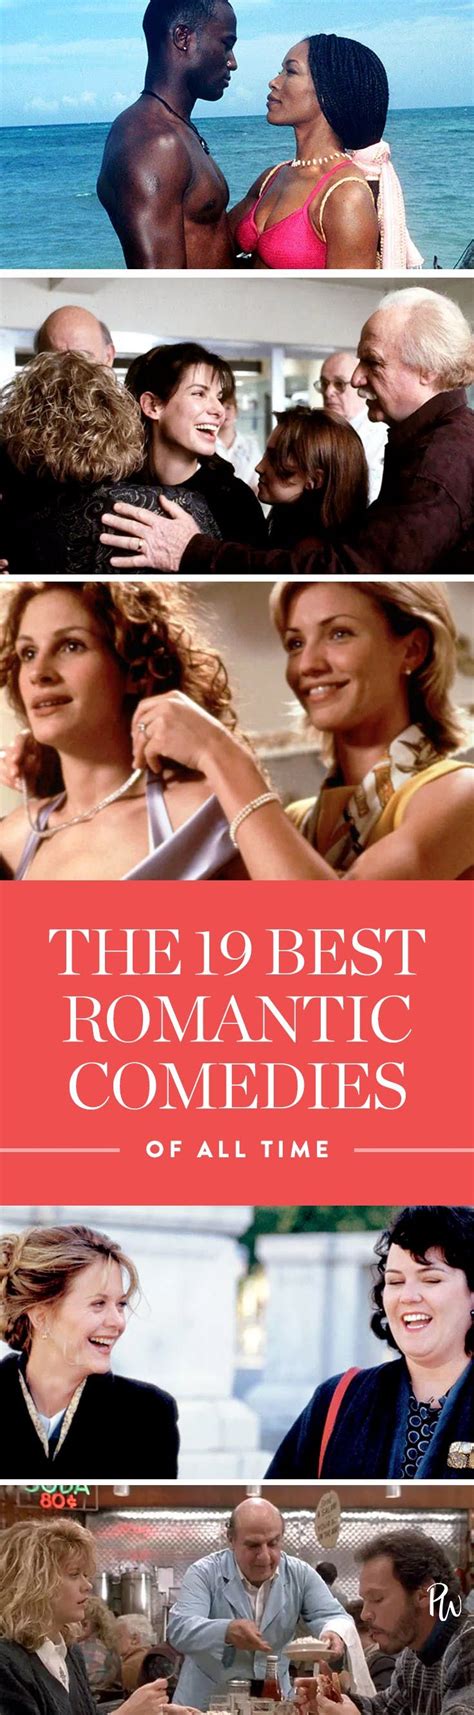 The 78 Best Romantic Comedies Of All Time Best Romantic Comedies Romantic Comedy Movies Top